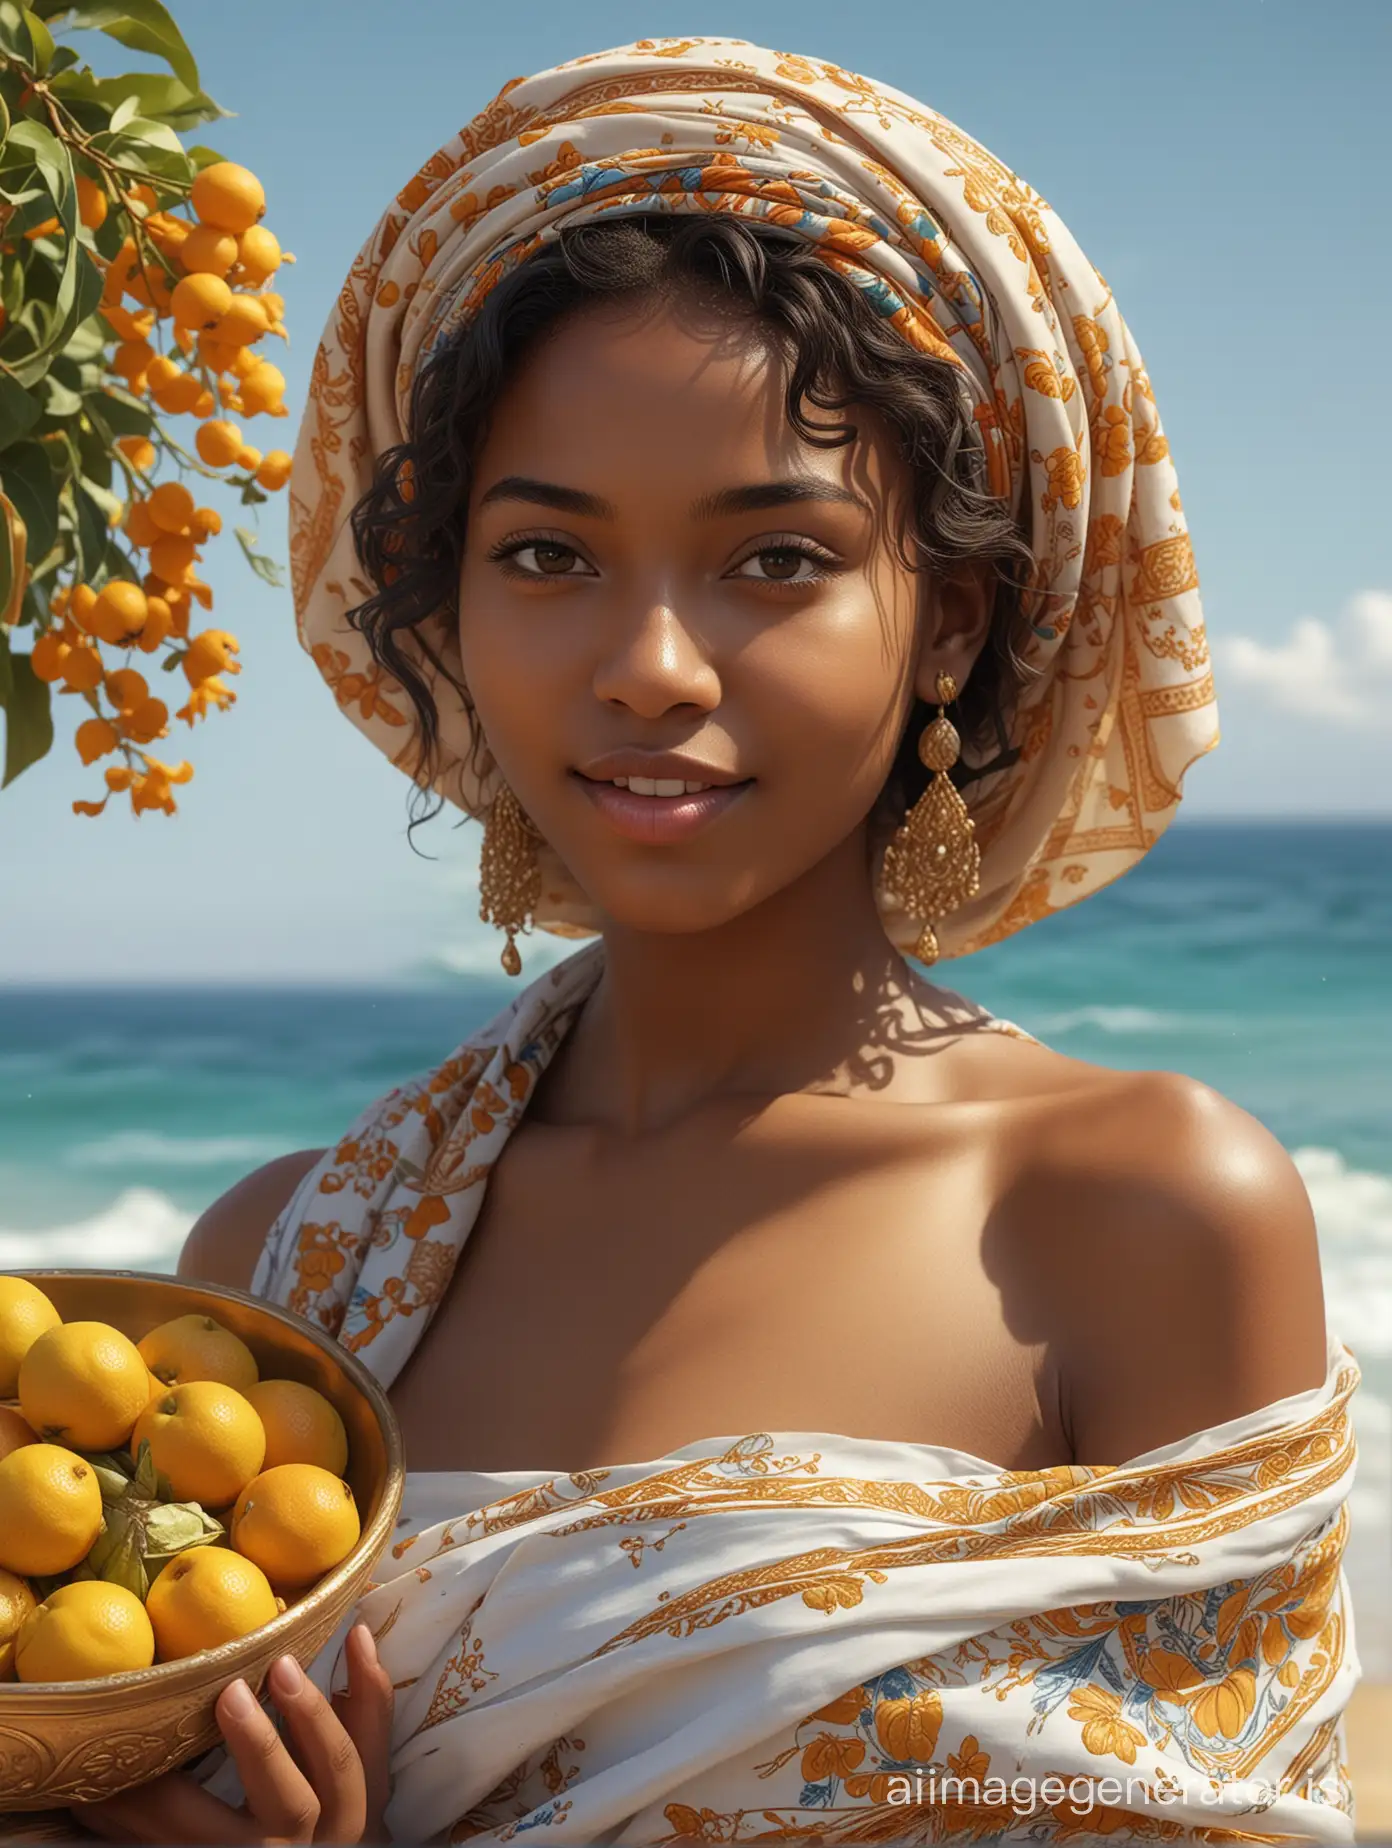 nude, 18 year old, most beautiful nude Senegalese girl on Senegalese beach, blue sea in the background, firm perky breasts, abundant flowers, holding golden bowl with exotic fruits, shy smile, sensual longing look, partly covering herself with silk scarf, realistic, stunning realistic photograph, full lips, 3D render, Octane render, intricately detailed, cinematic, trending on ArtStation | Isometric | Centered hyper realistic cover photo awesome full color, hand drawn, dark, gritty, realistic style similar to Mucha, Klimt, Erte .12k, intricate. high definition , cinematic, Rough sketch, mix of bold dark lines and loose lines, bold lines, on paper